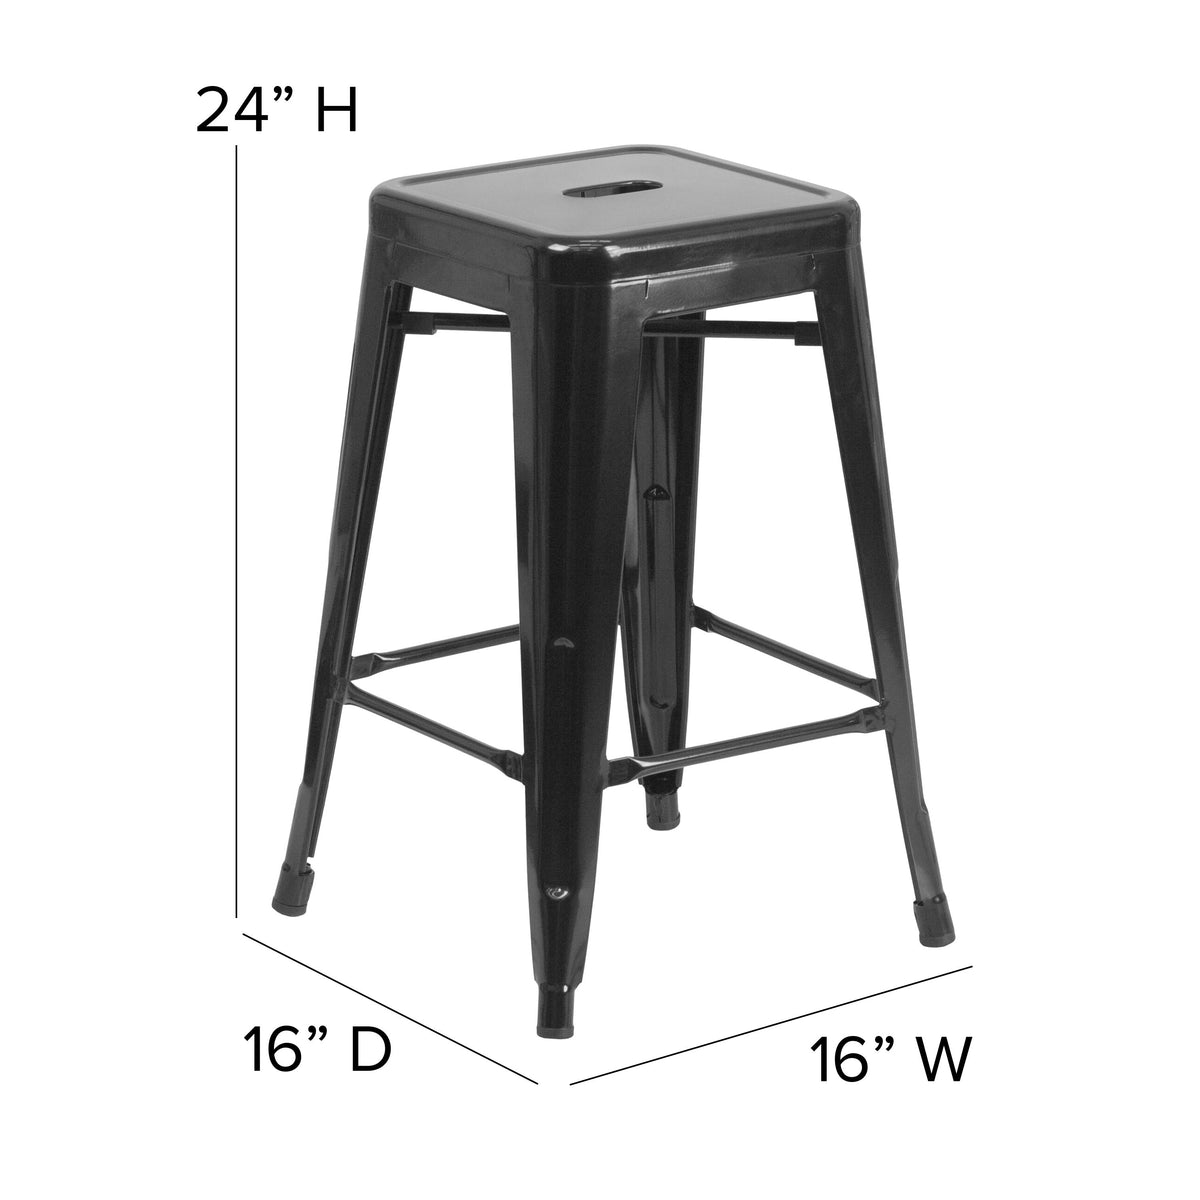 Black/Teak |#| Indoor/Outdoor Backless Counter Stool with Poly Seat - Black/Teak